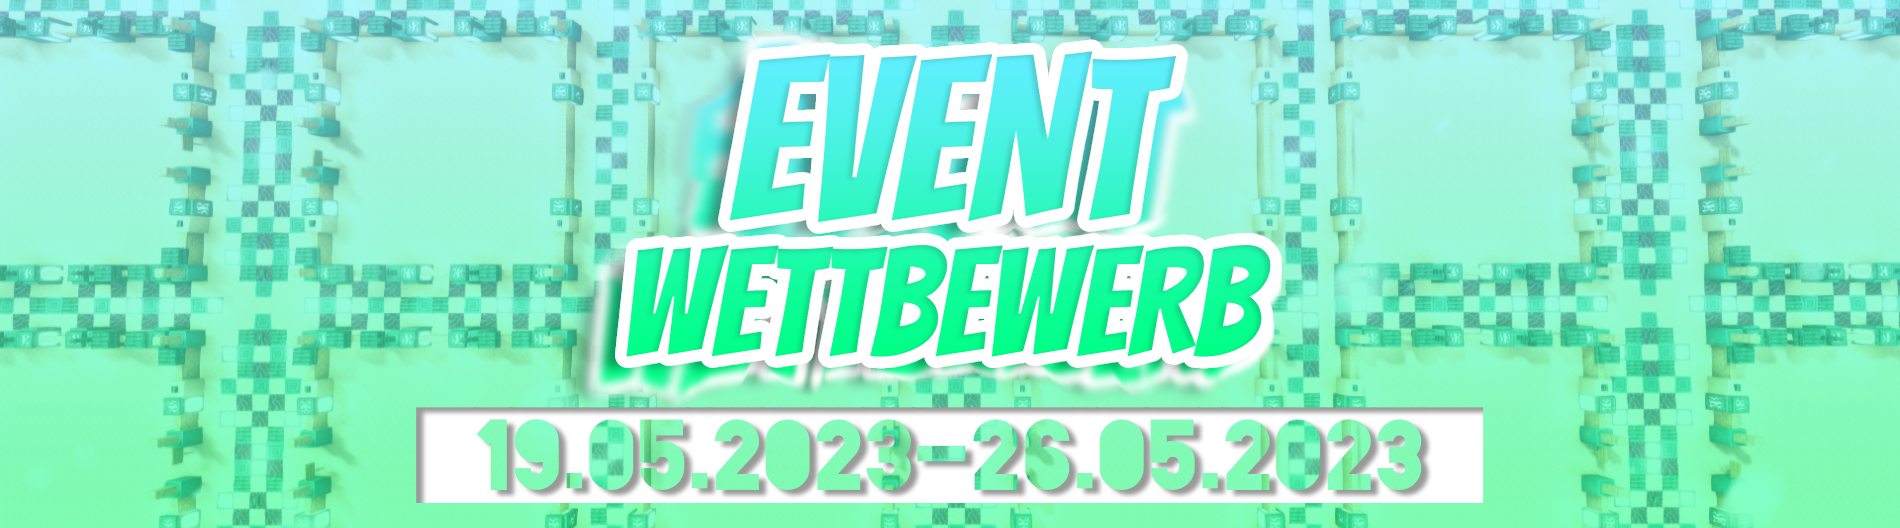 event paletti_2.png